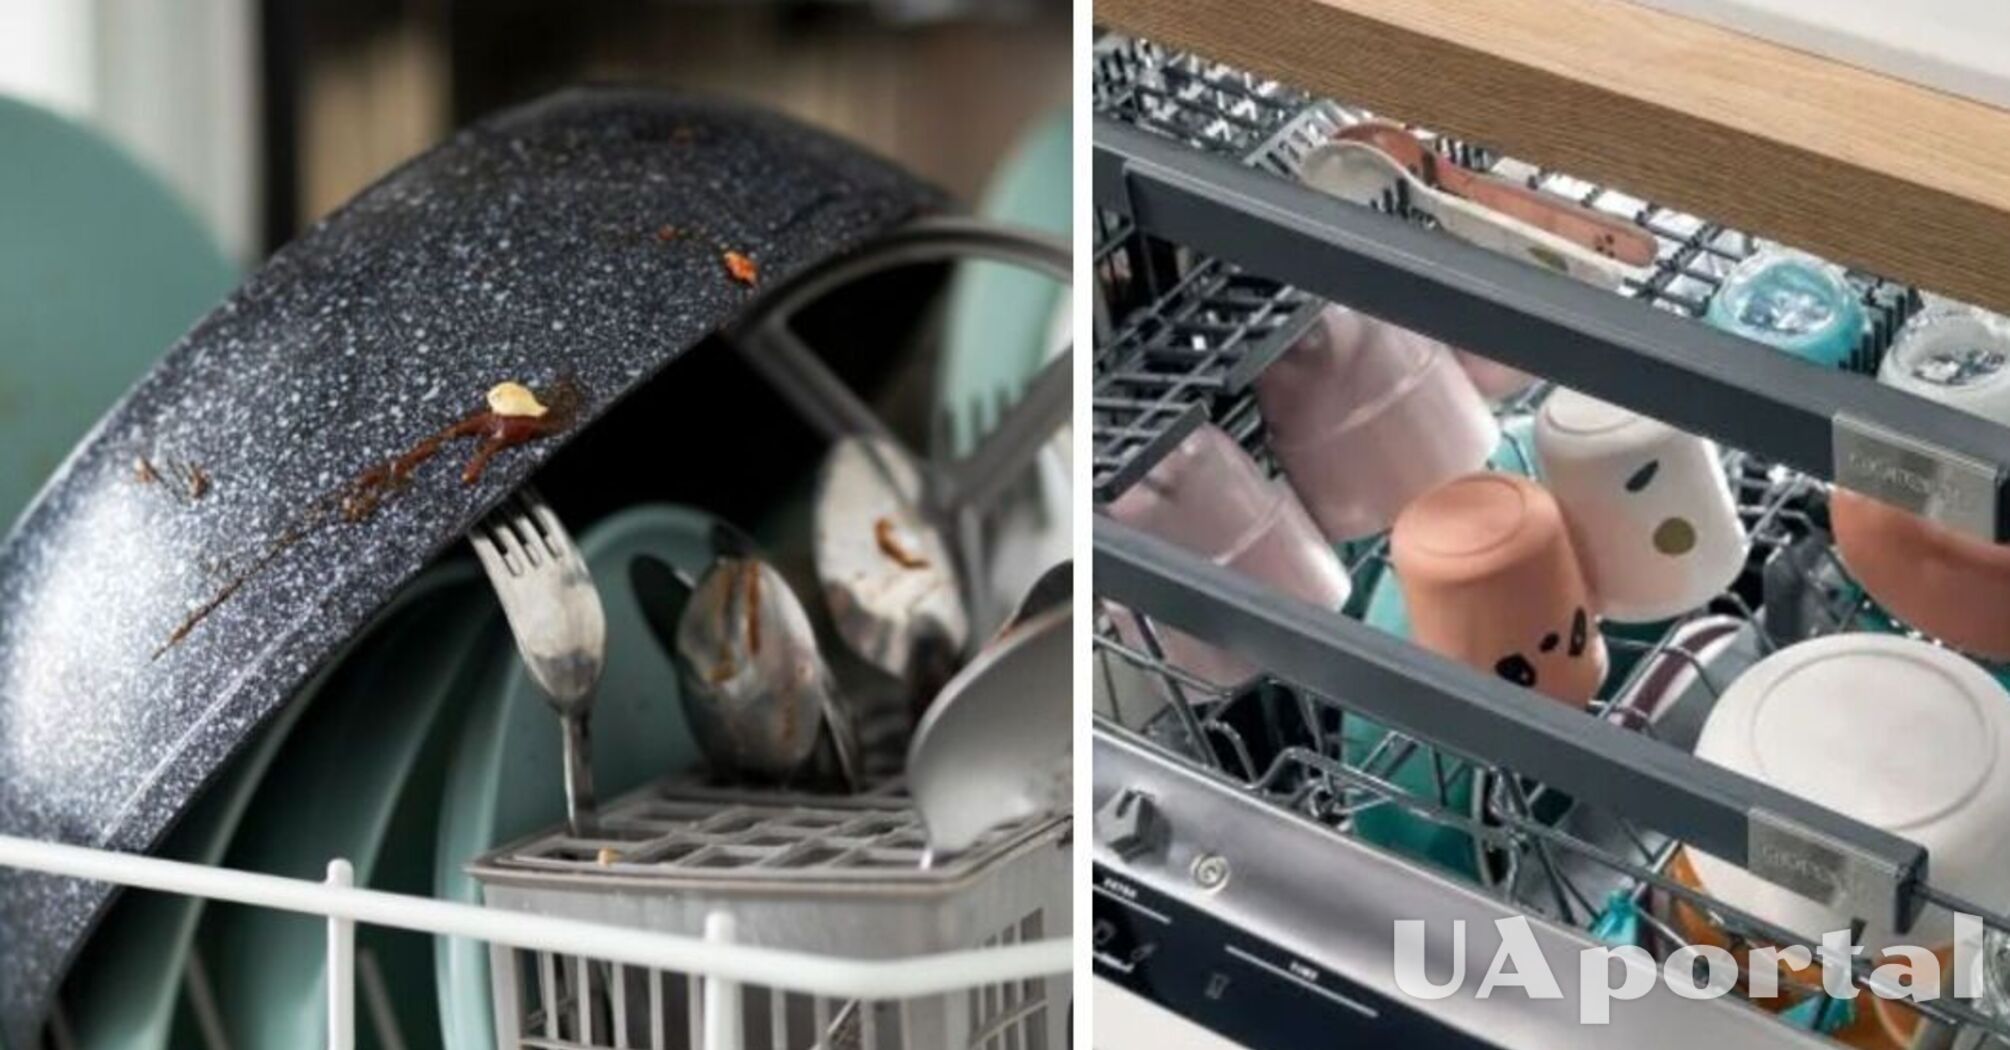 How to load the dishwasher to ensure it performs at its best: useful tips